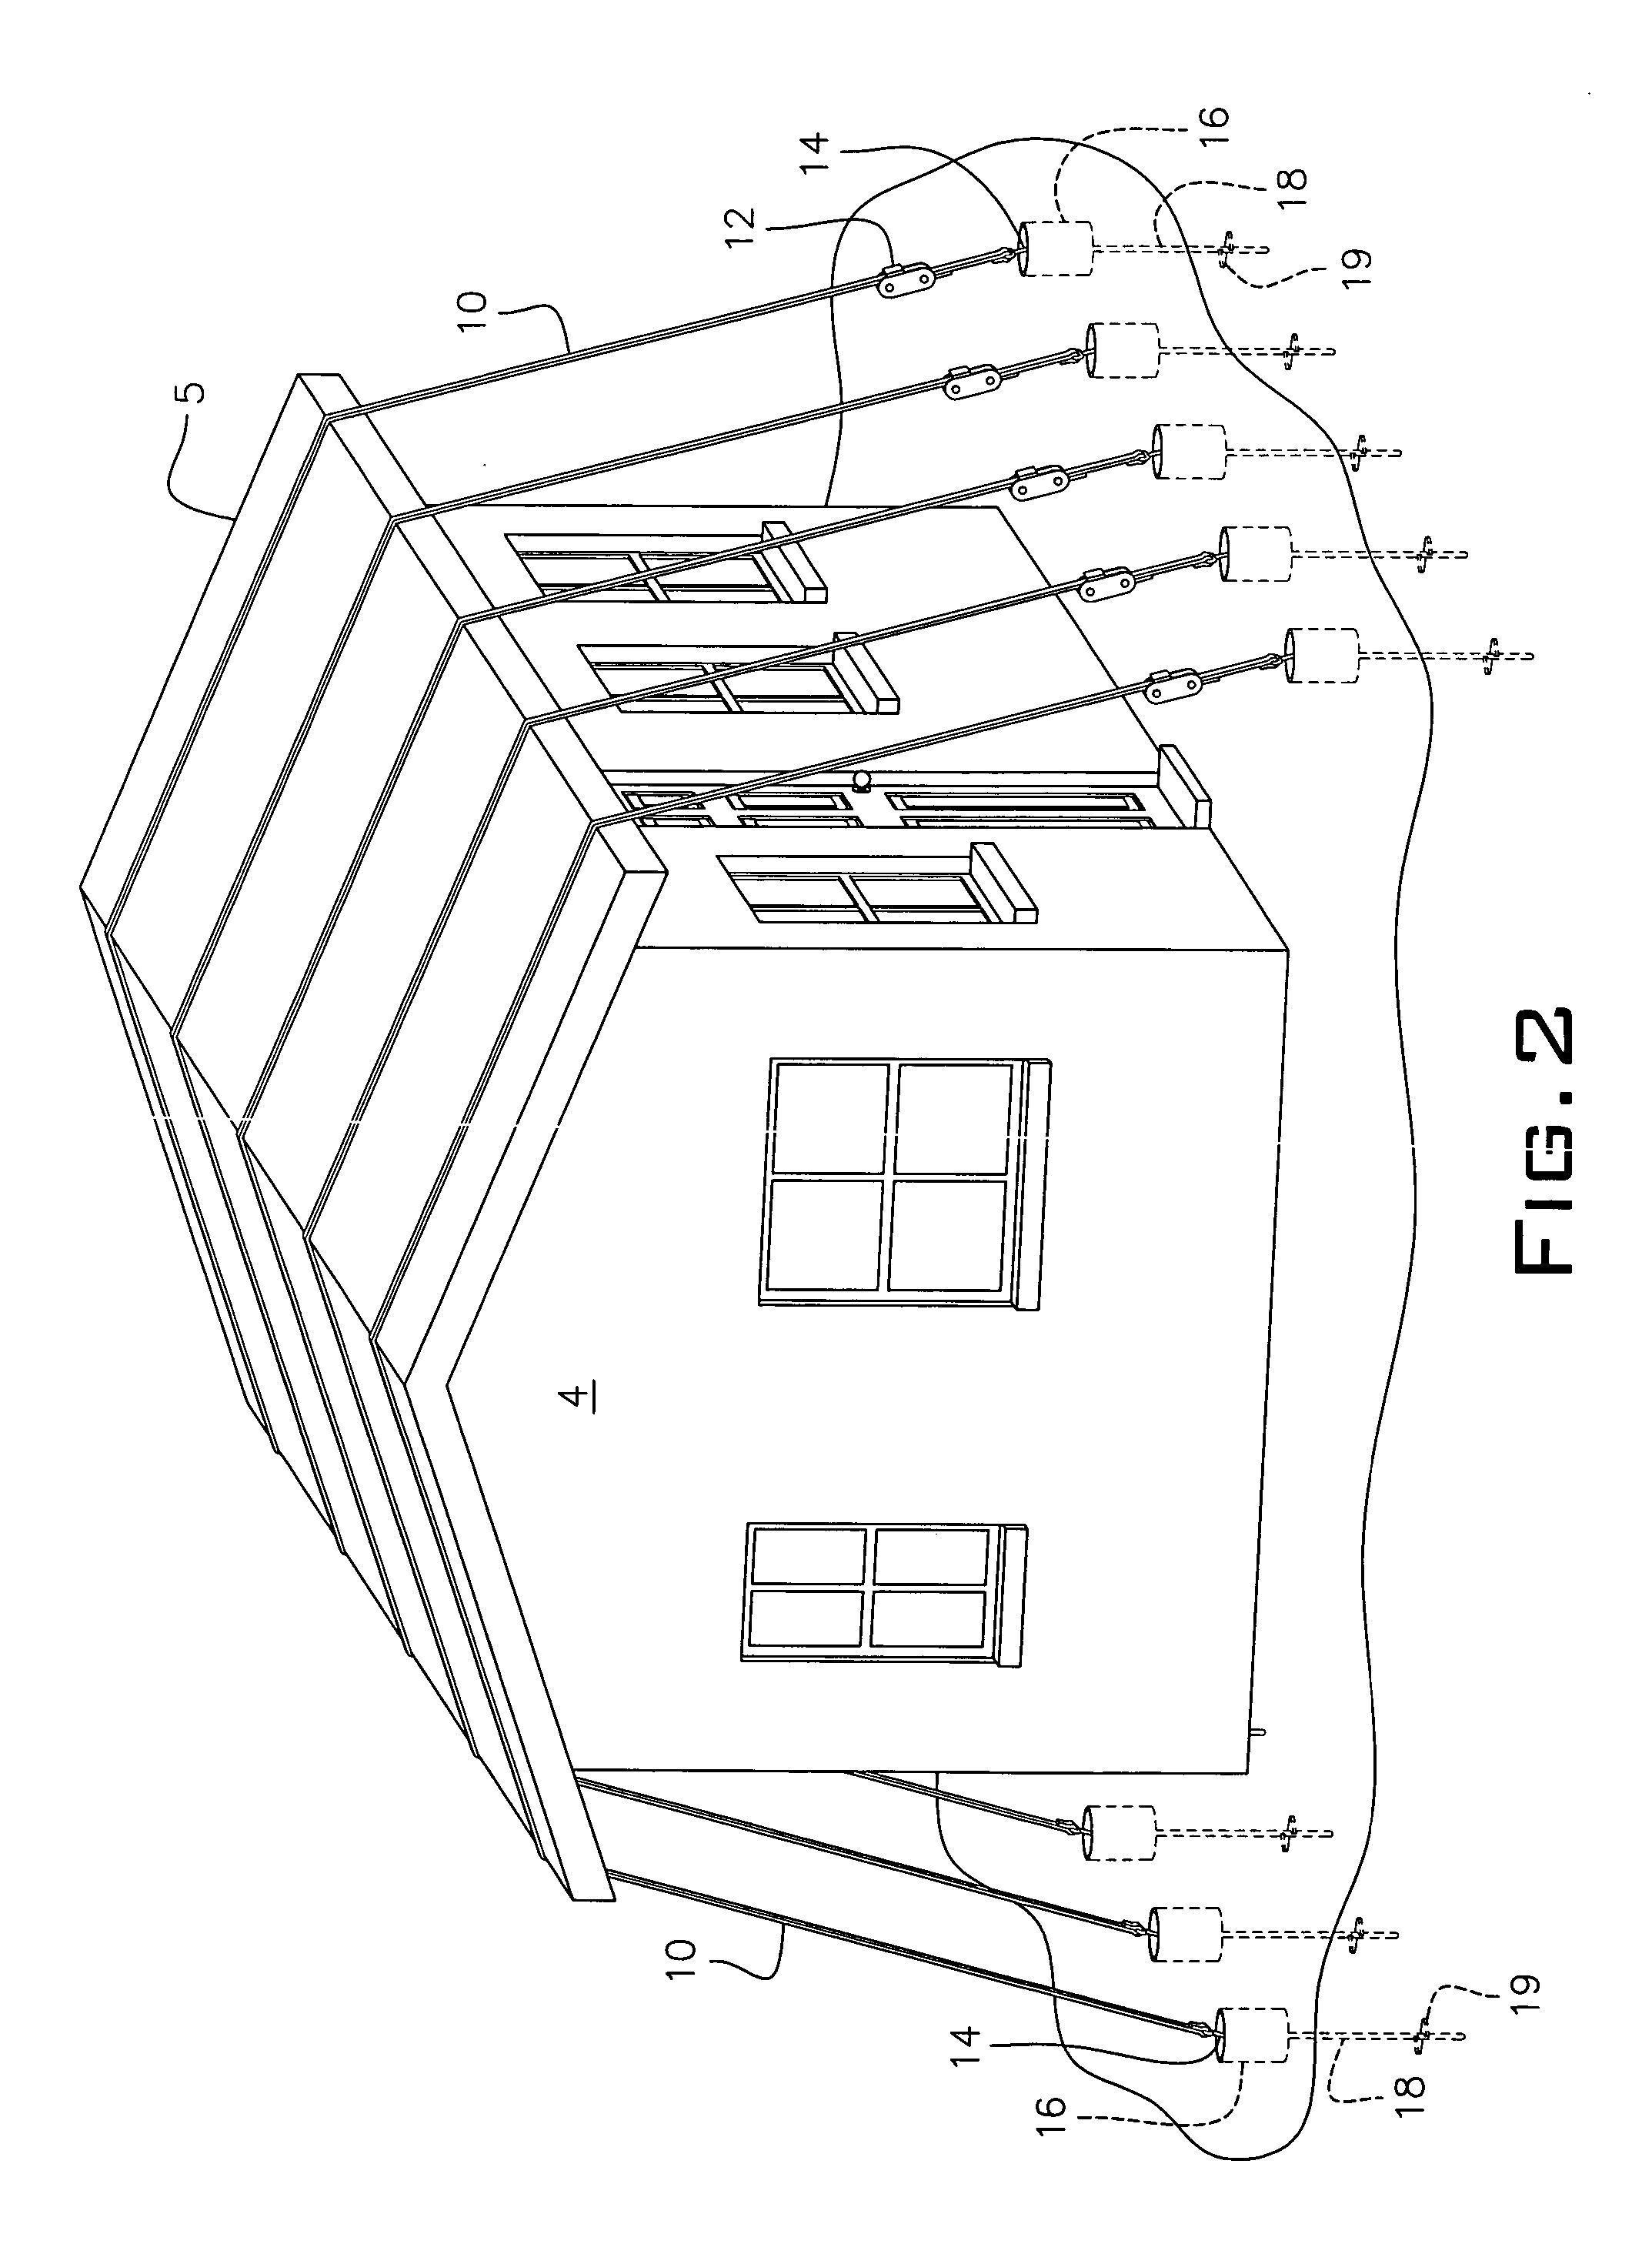 Method and apparatus for securing property from wind damage